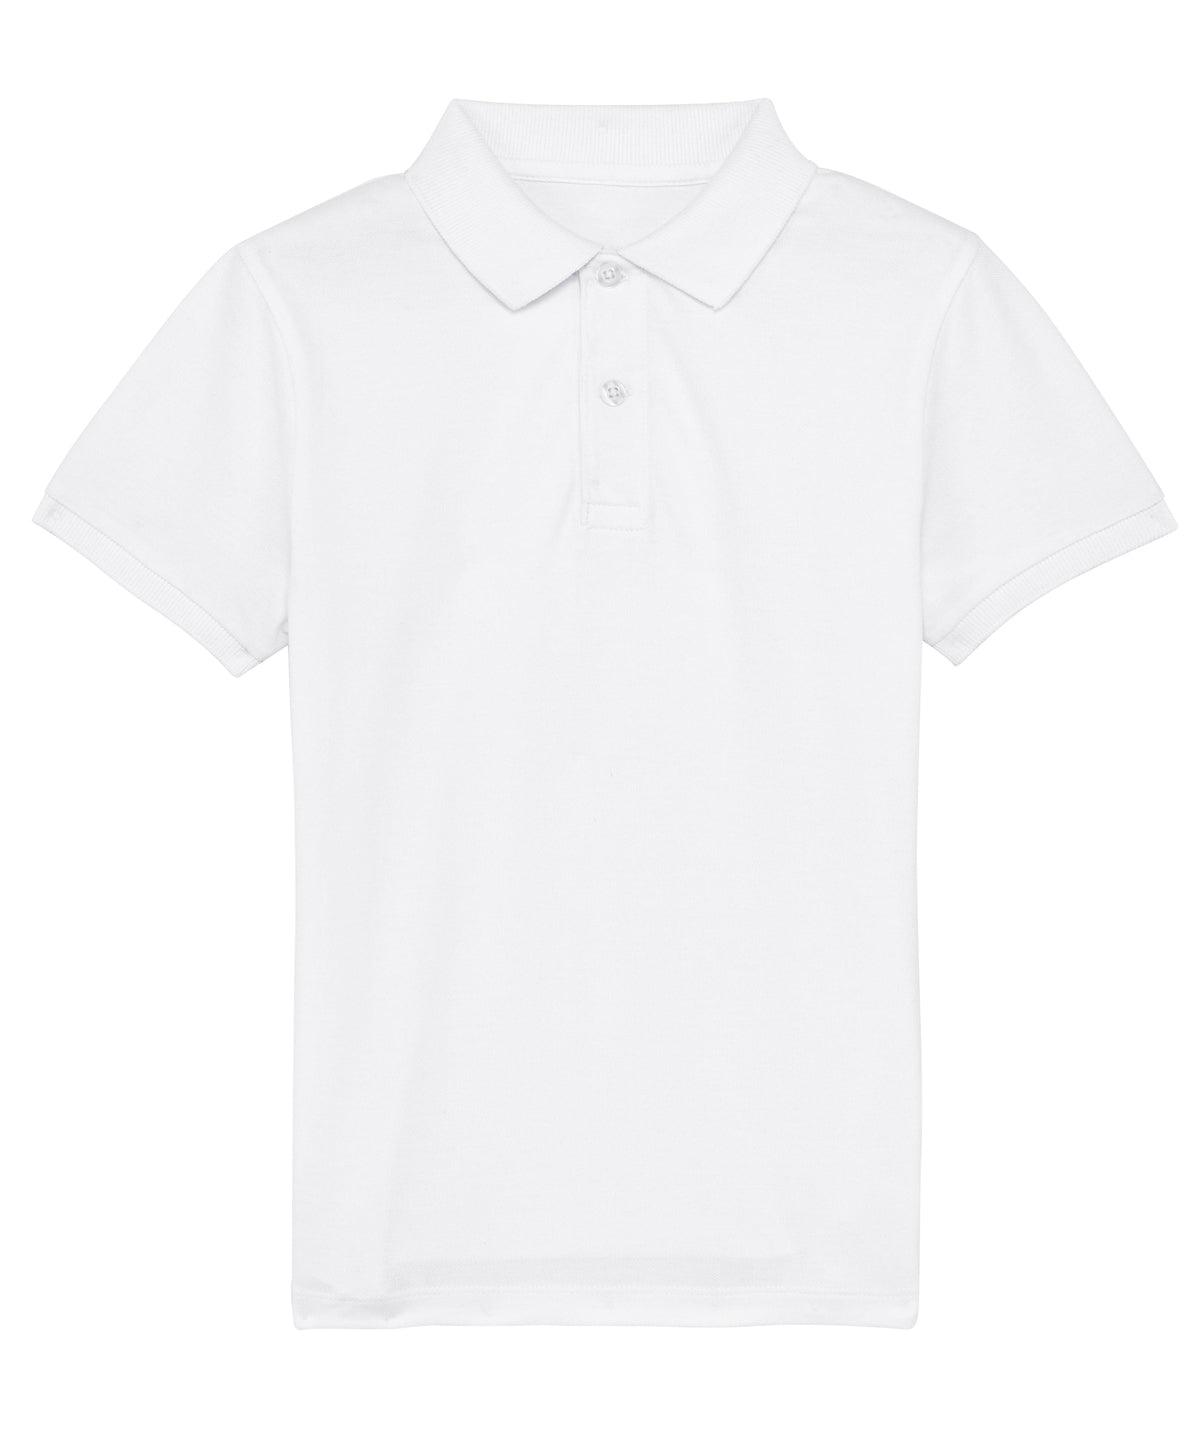 White - Mini sprinter kids polo (STPK908) Polos Stanley/Stella Exclusives, Junior, New For 2021, New Styles, Polos & Casual, Raladeal - Stanley Stella Schoolwear Centres